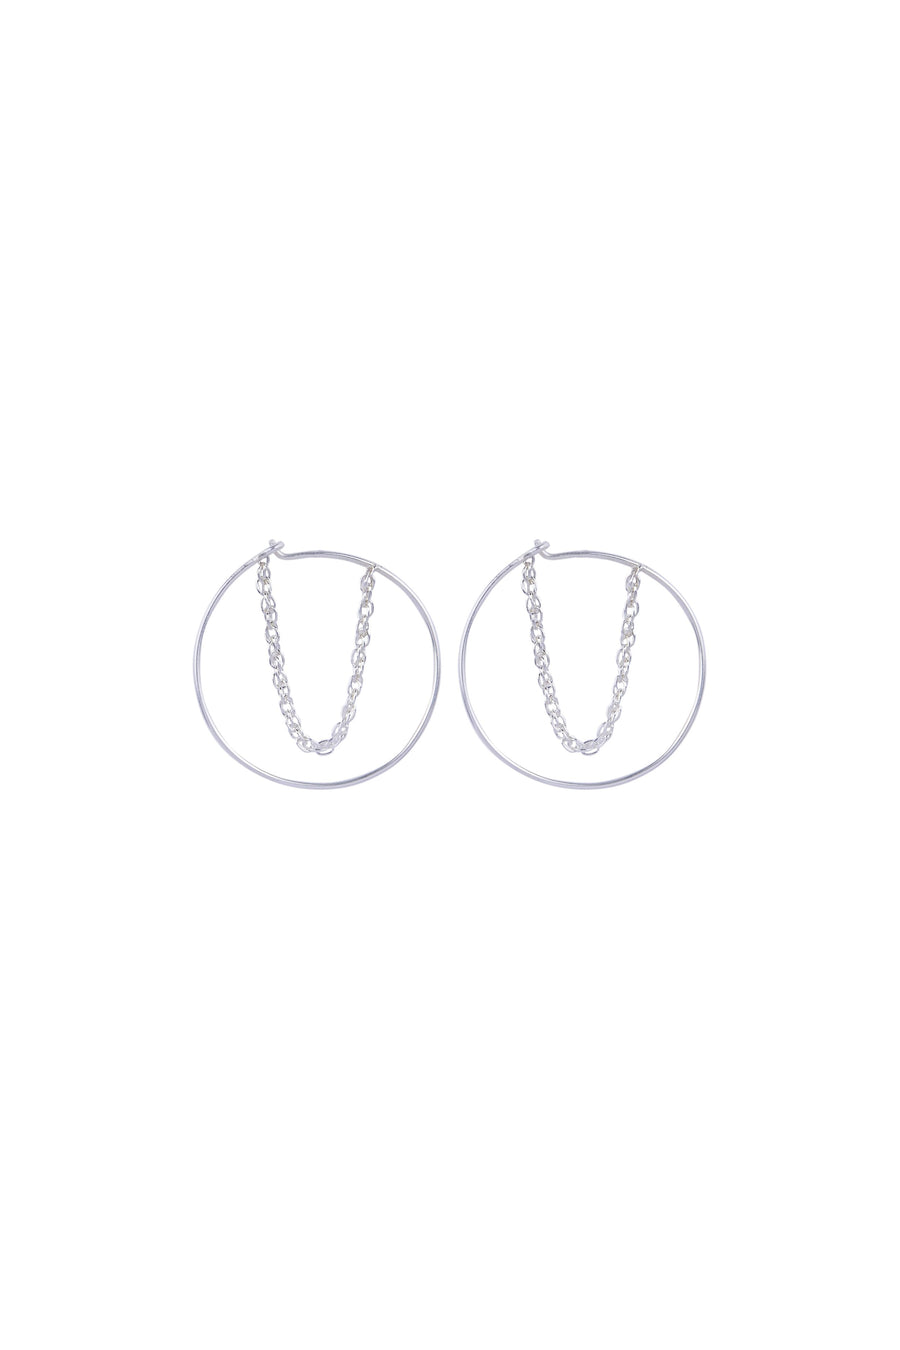 Silver Cord Hoops